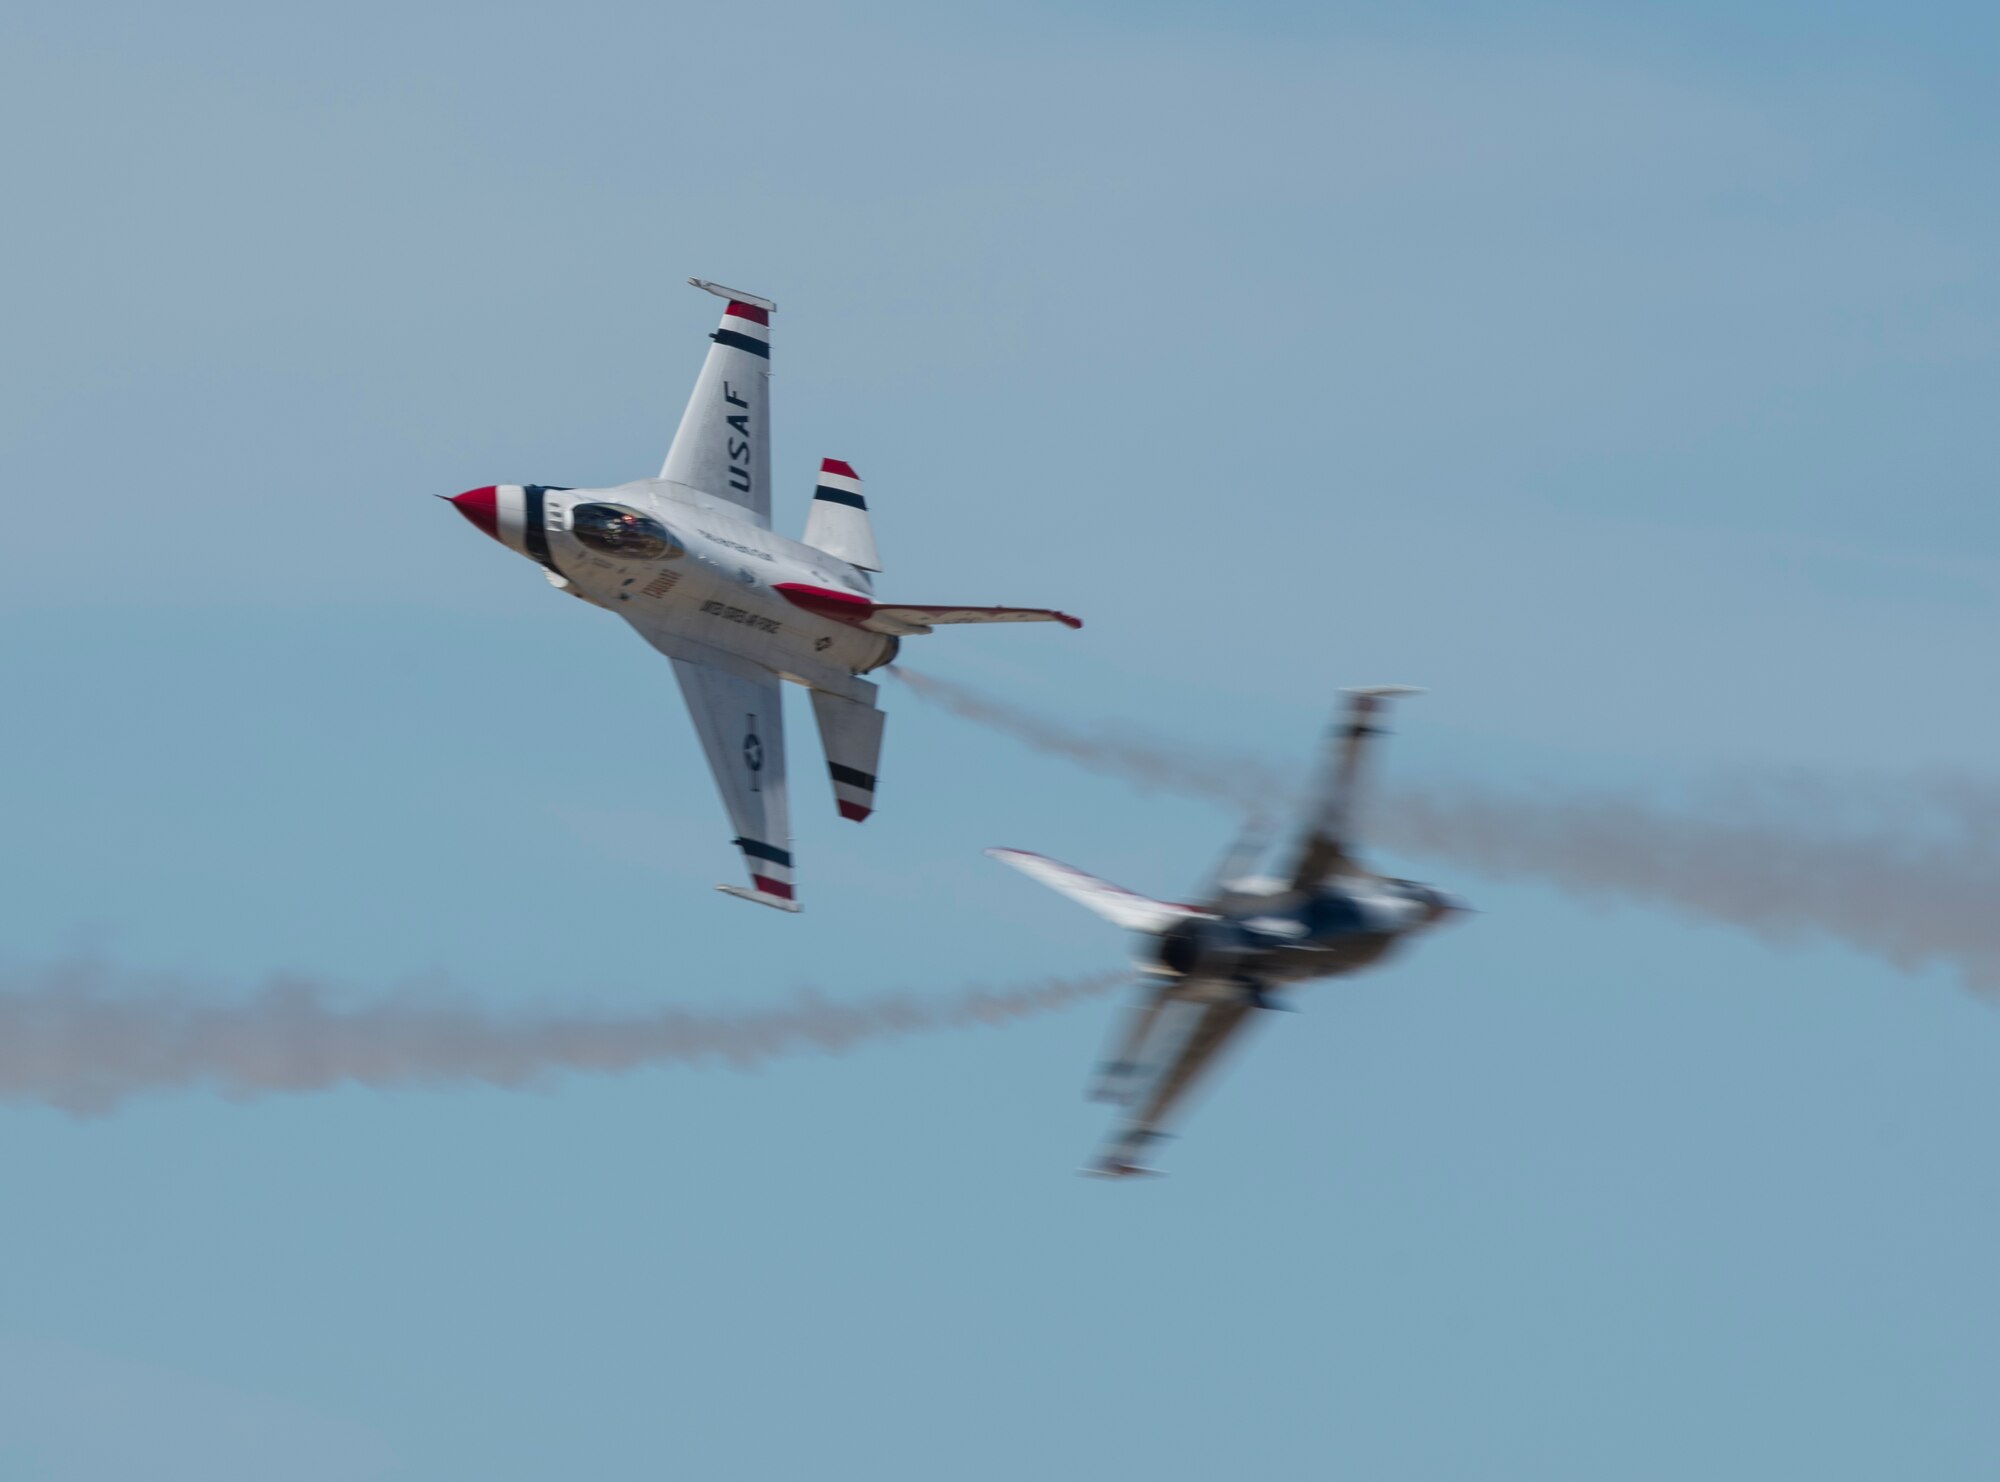 Two F-16 Fighting Falcons from the Thunderbirds aerial demonstration team perform a close, high-speed pass at the Skyfest 2017 air show and open house July 30, 2017, at Fairchild Air Force Base, Washington. Only the top U.S. Air Force pilots are selected to perform for the Thunderbirds, but they still train continuously to perfect their craft while serving with the Thunderbirds. (U.S. Air Force photo / Airman 1st Class Ryan Lackey)